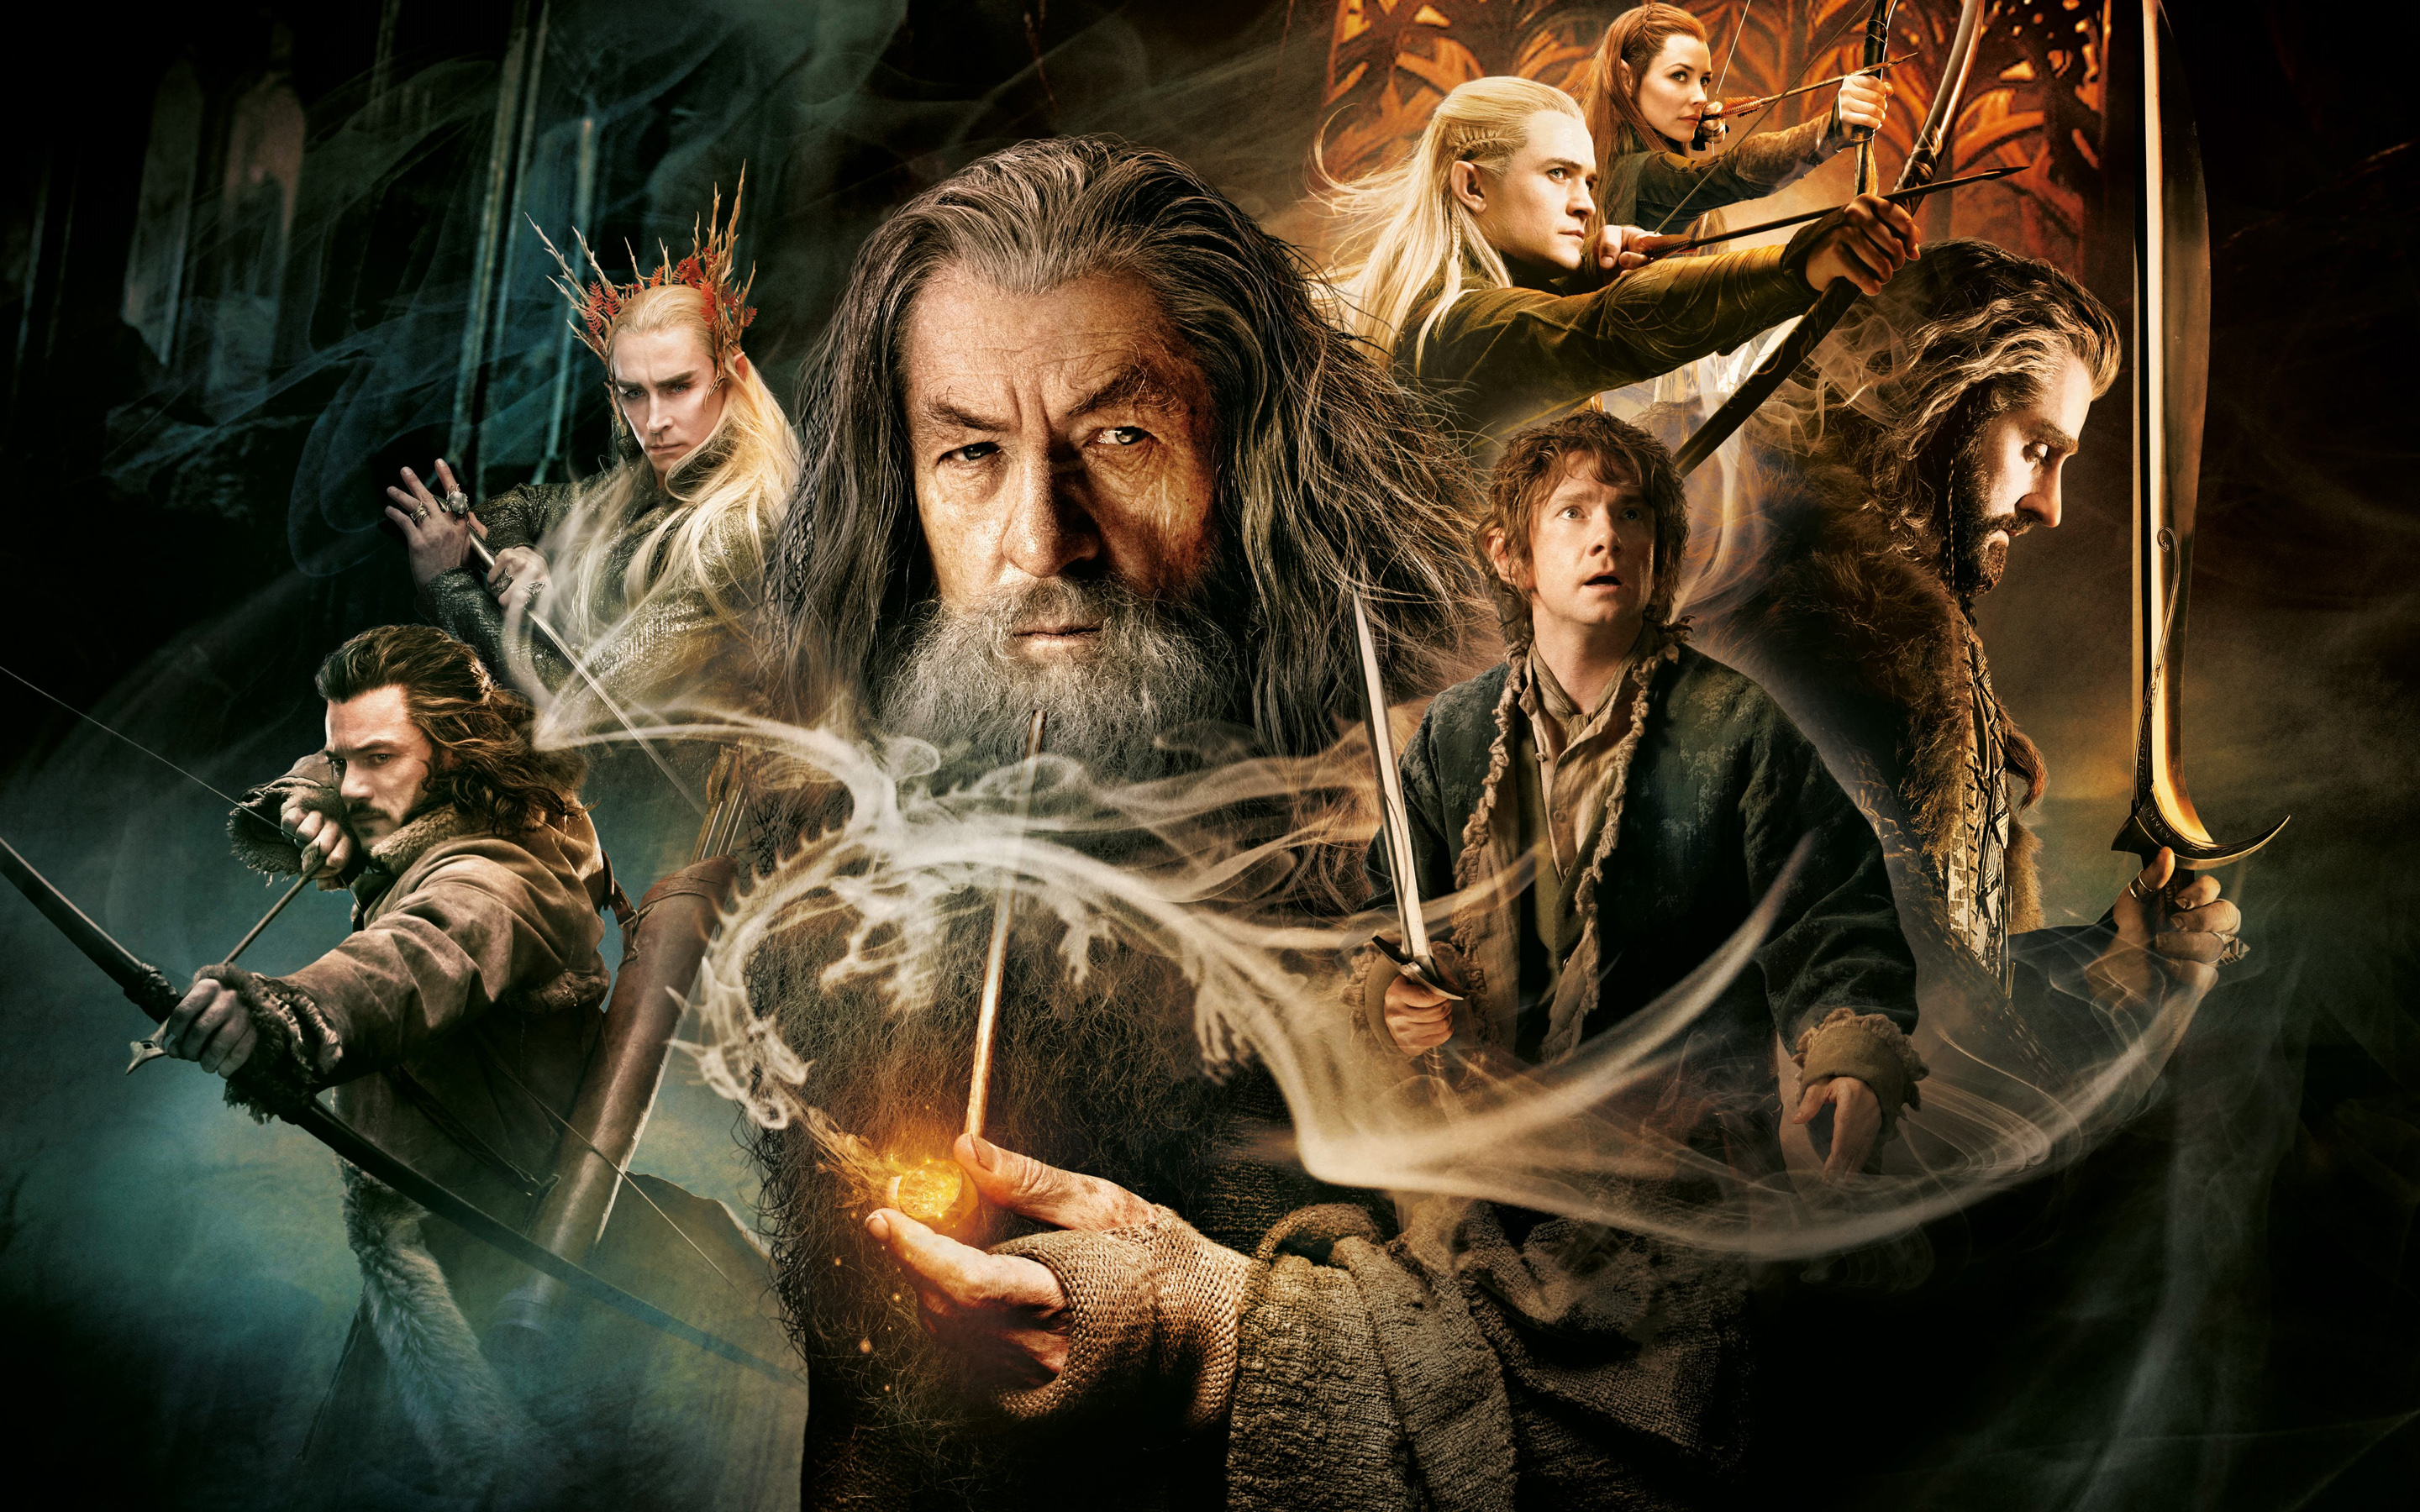 lord of the rings, movie, the hobbit: the desolation of smaug, gandalf, the lord of the rings